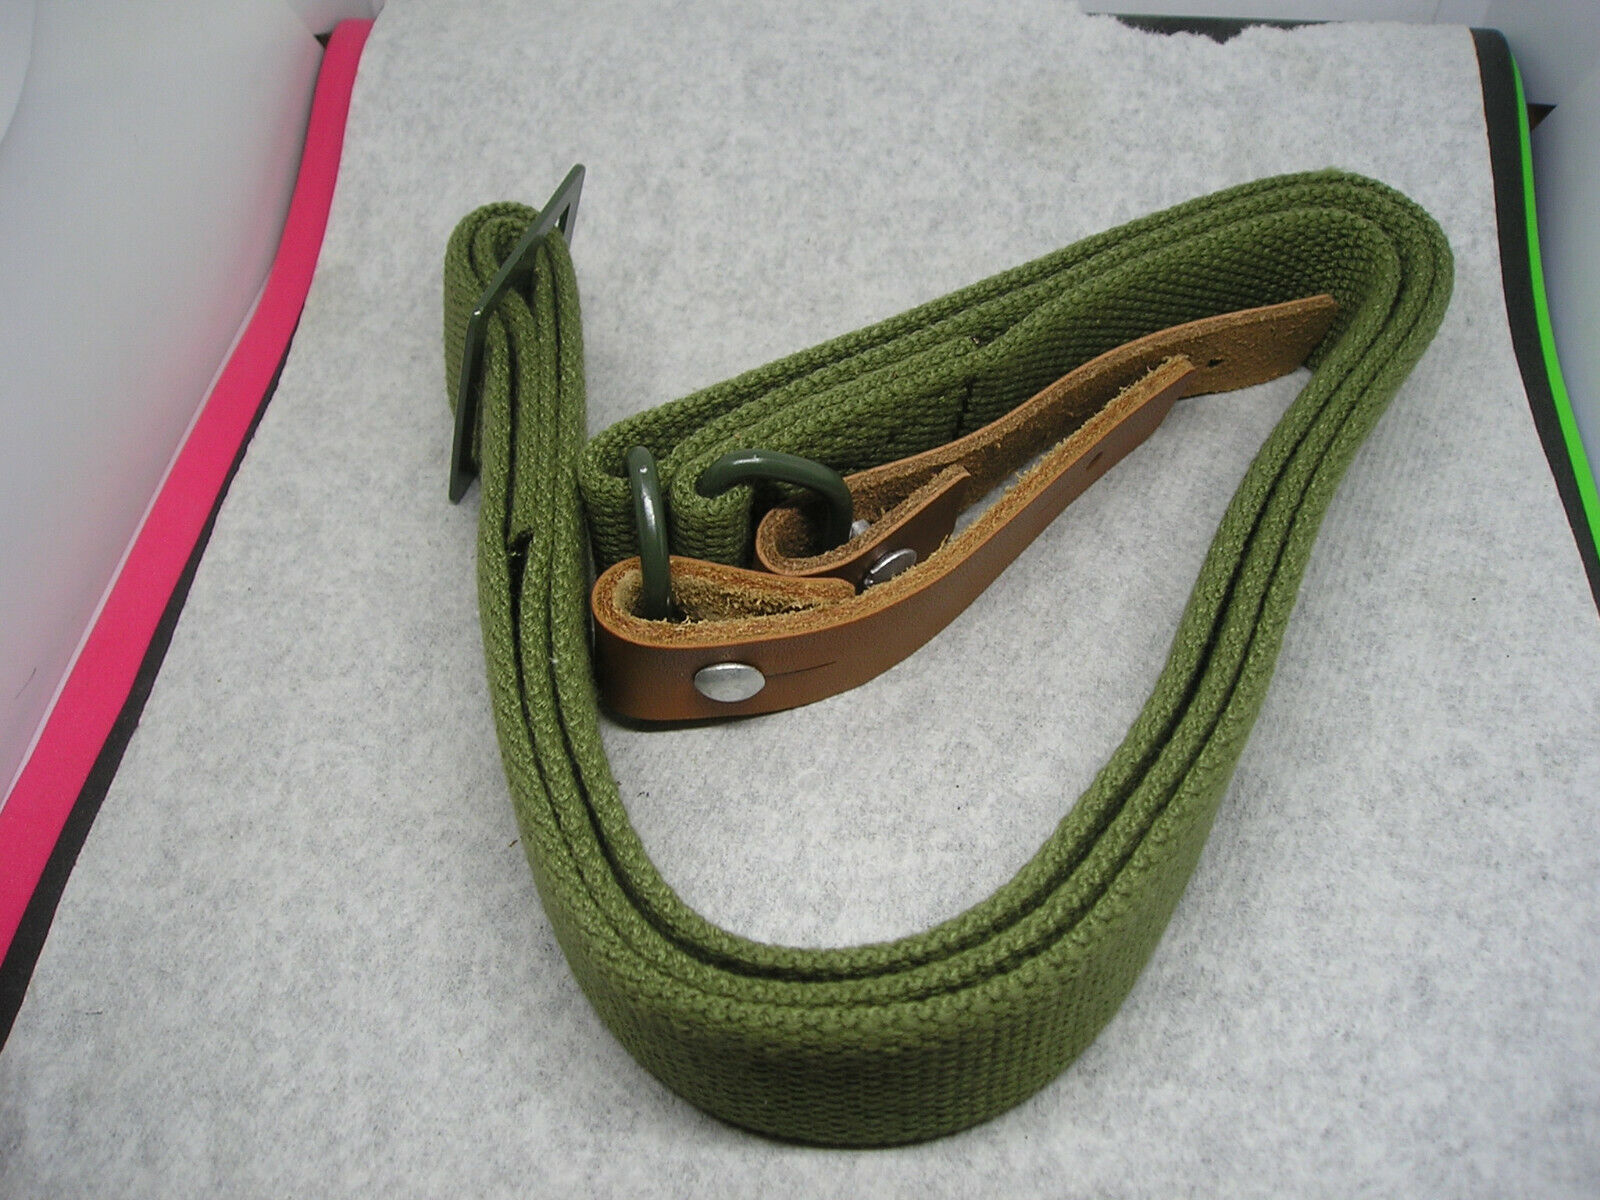  SKS sling, new in wrap from China, one (1), 7.62 x 39